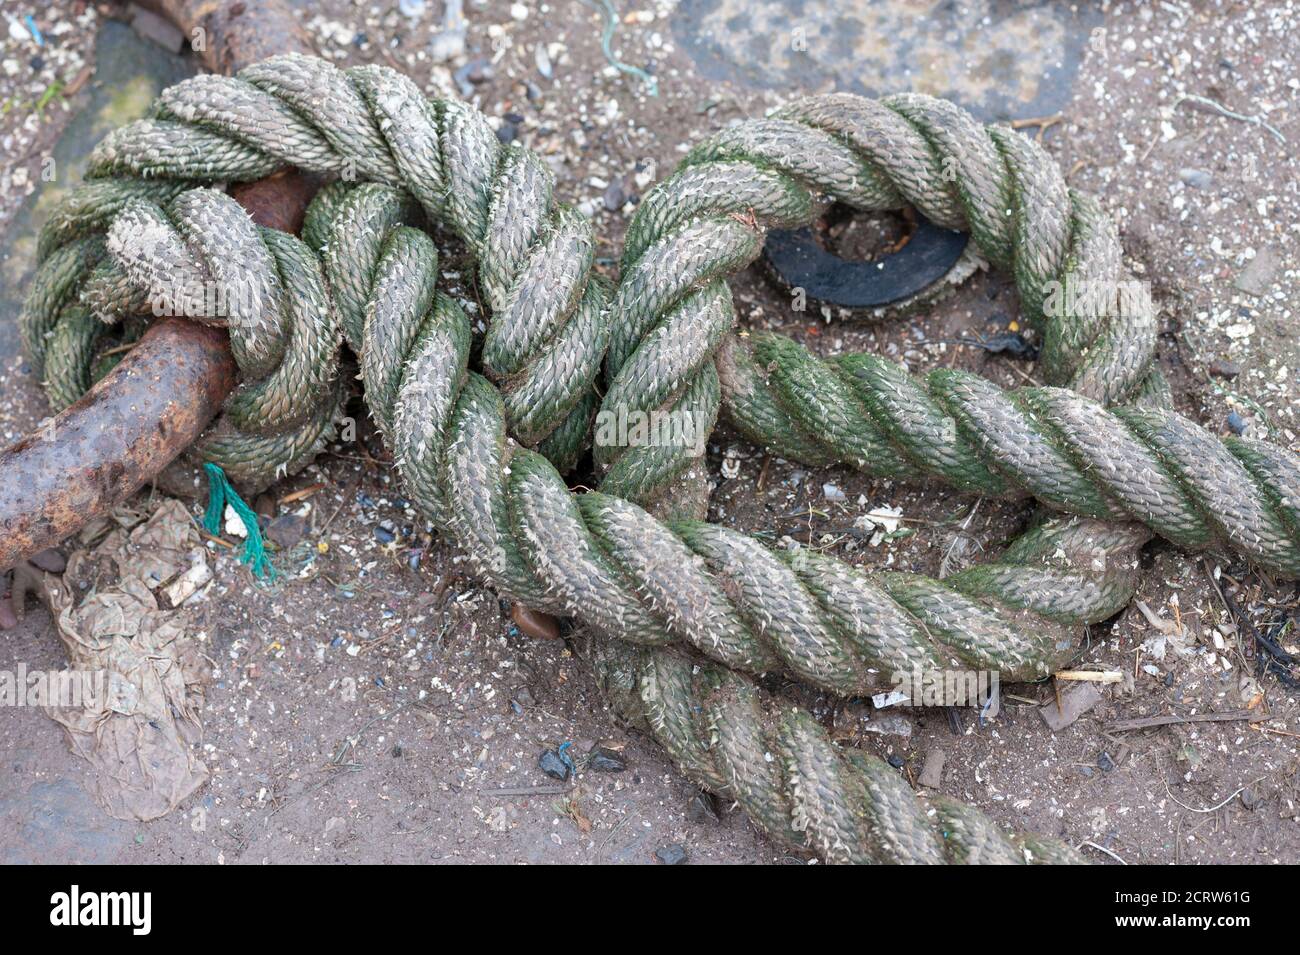 Knotted rope at a working harbour, Dunbar, Scotland. Stock Photo